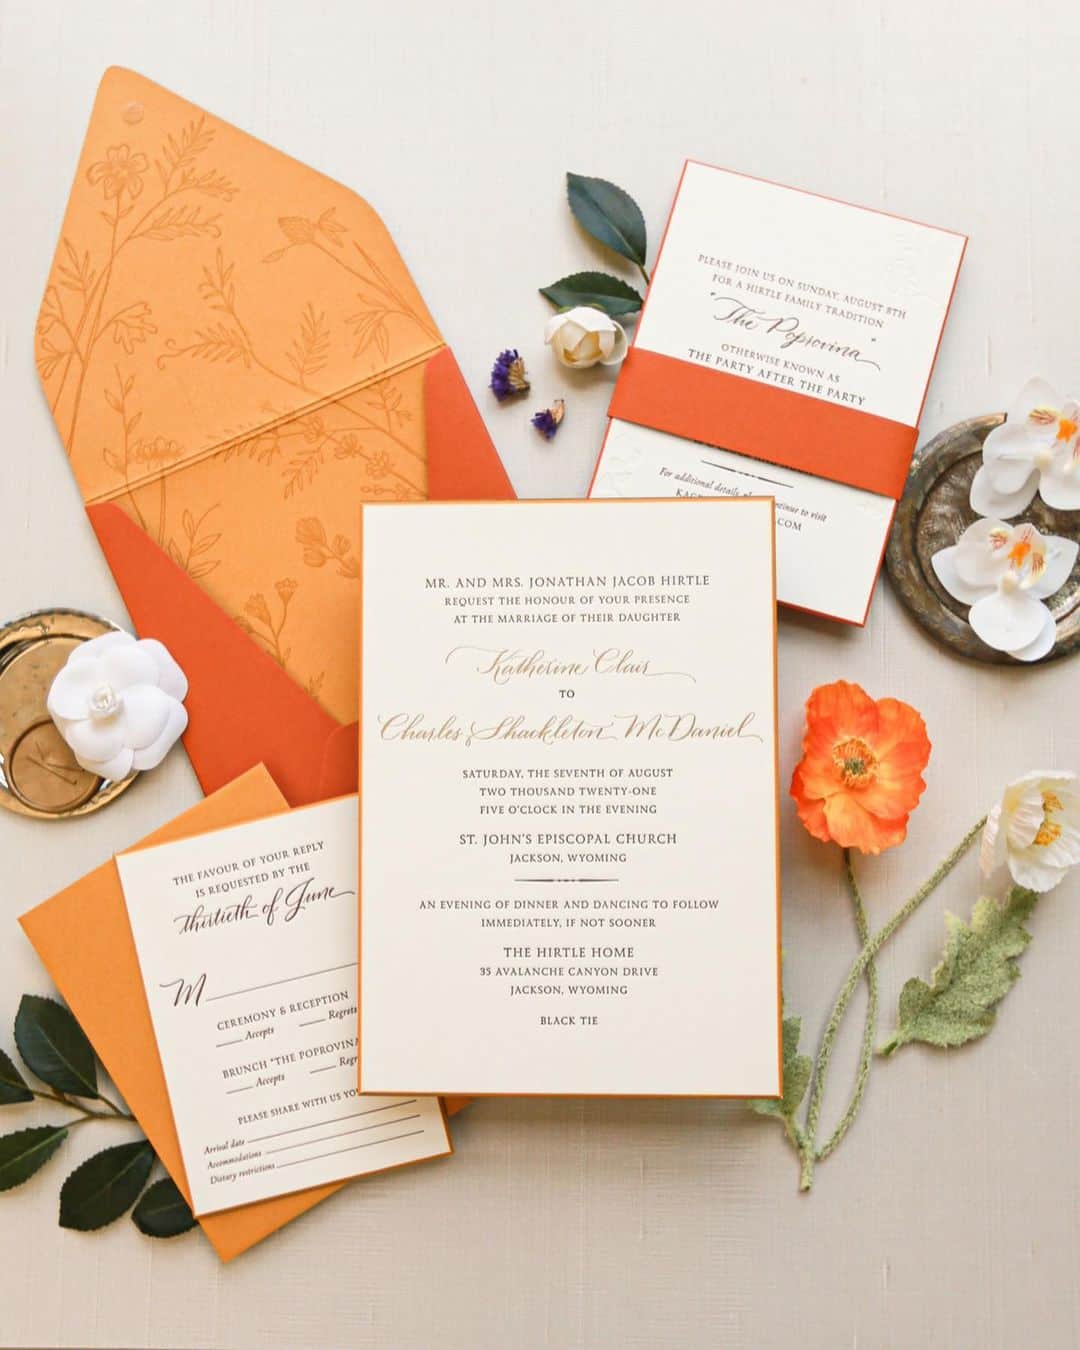 Ceci Johnsonのインスタグラム：「WEDDING | Presenting our couture invitation for Kacey and Charlie’s Jackson Hole, Wyoming wedding featuring the warm color of autumn. Hand-stained wood, brown and gold foil letterpress on 4-ply luxe paper, with a custom-converted envelope. #CeciCouture ⠀⠀⠀⠀⠀⠀⠀⠀⠀ Visit our last post to see the beautiful wedding reception that went with this invitation design. ⠀⠀⠀⠀⠀⠀⠀⠀⠀ CREATIVE PARTNERS:  Invitation Design: @cecinewyork Event Planner: @augustacole Event Designer: @david_stark_design ⠀⠀⠀⠀⠀⠀⠀⠀⠀ #cecinewyork  #invitationsuite  #autumnvibes  #autumninvitations  #wyomingwedding  #orangeinvitations  #letterpress  #luxuryinvitations」